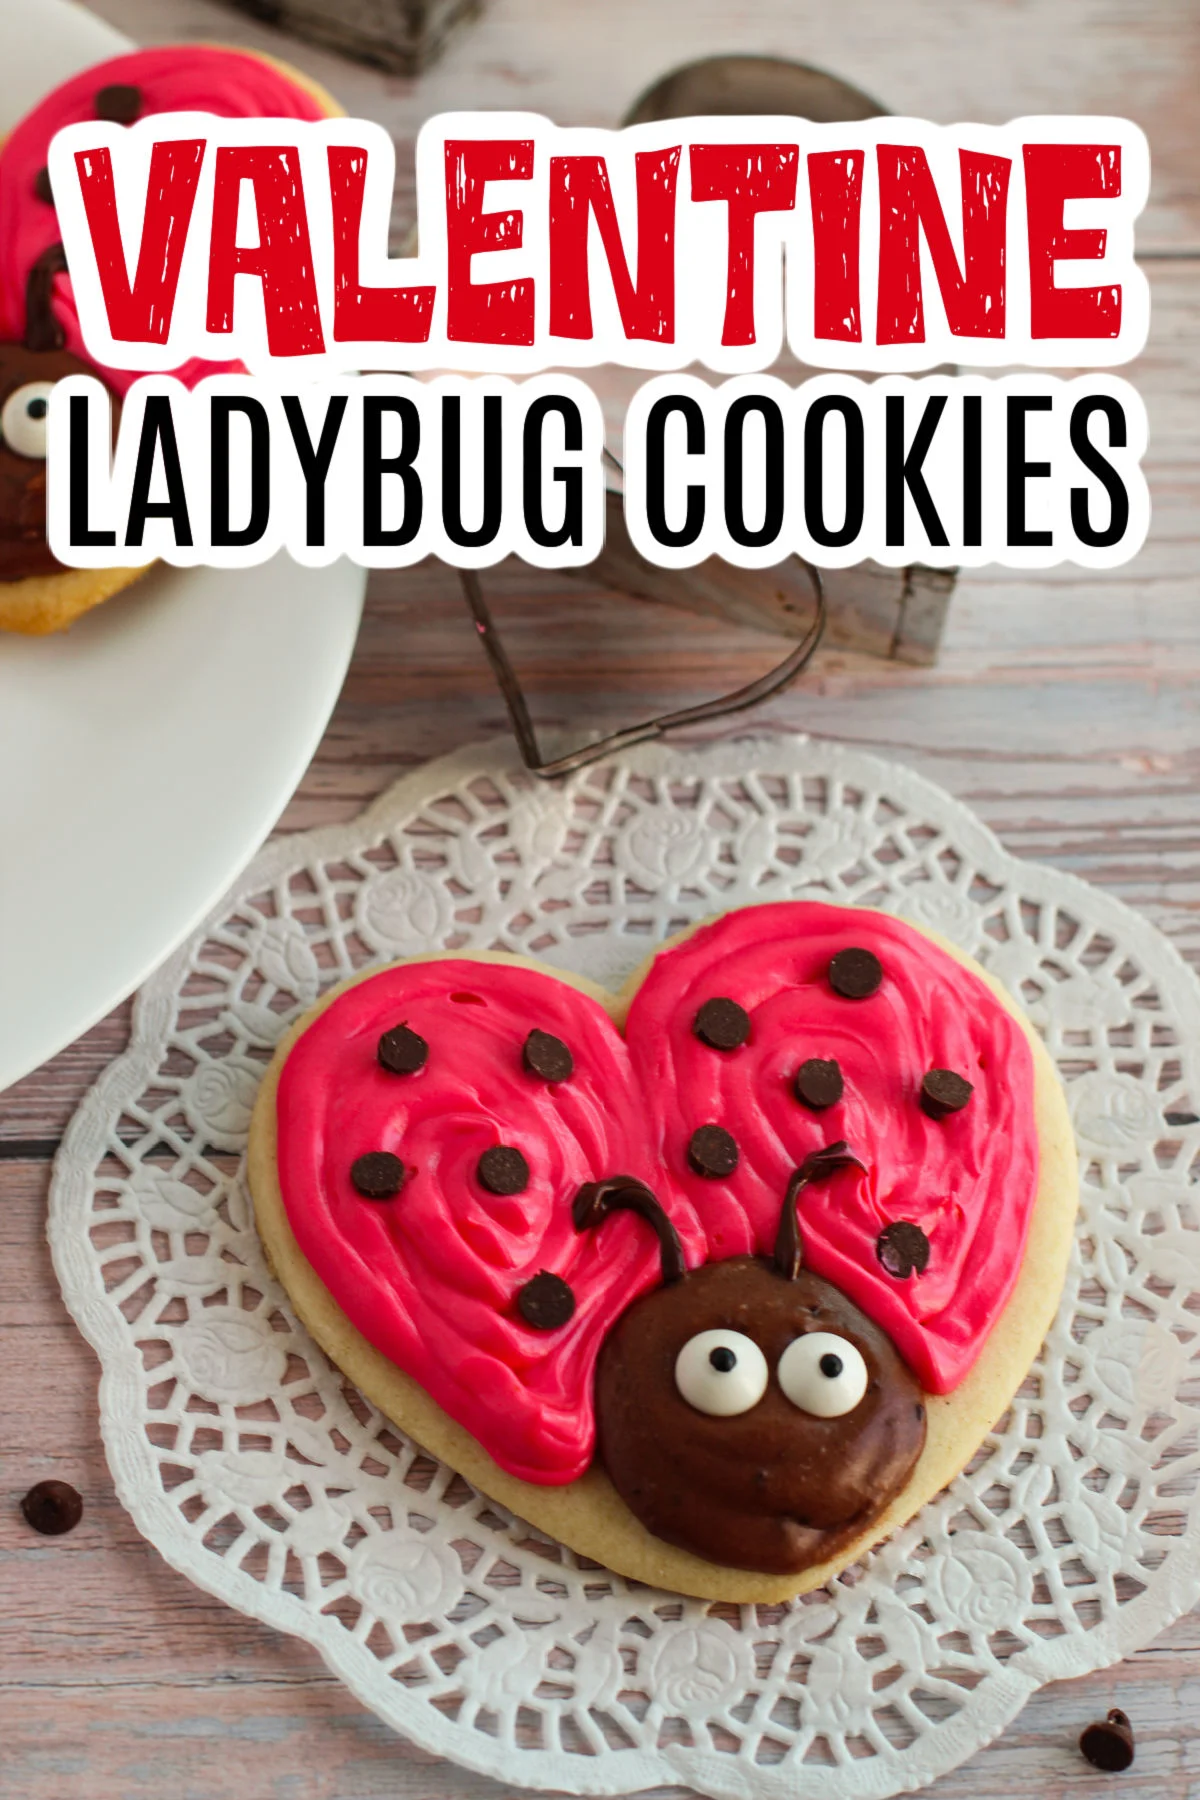 Ladybug Cookies on a white paper doily.